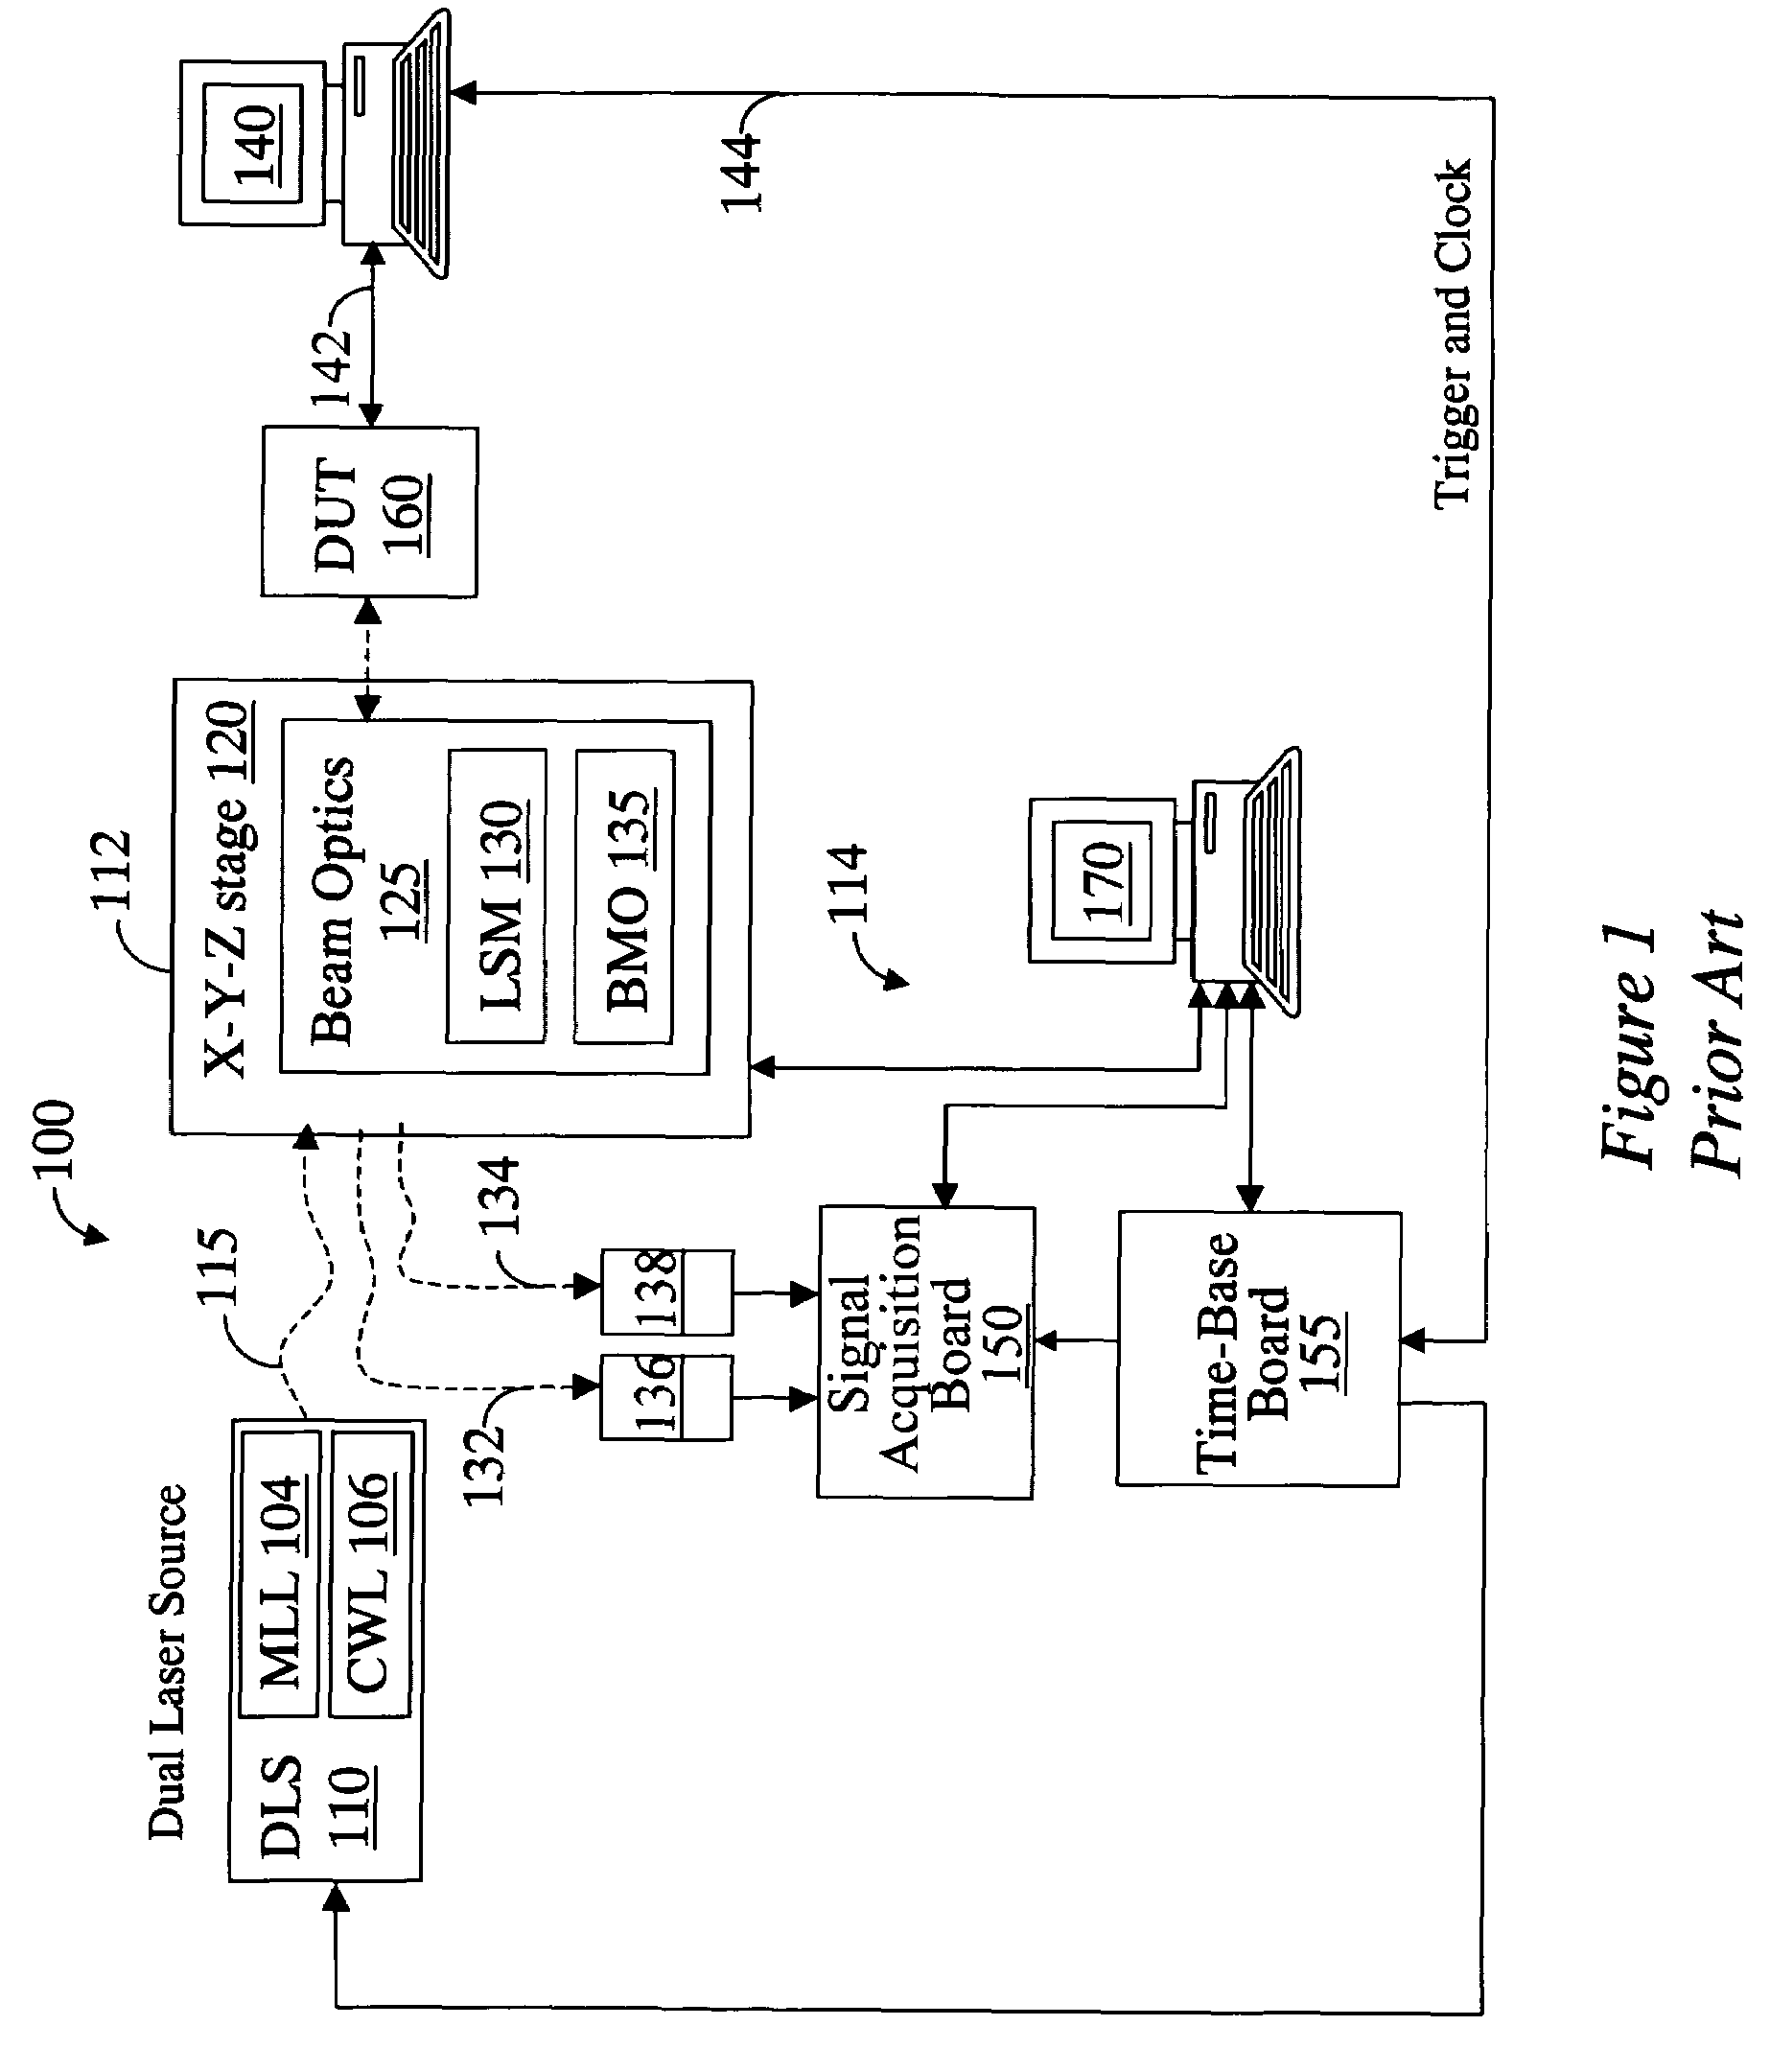 Method and apparatus for measuring high-bandwidth electrical signals using modulation in an optical probing system